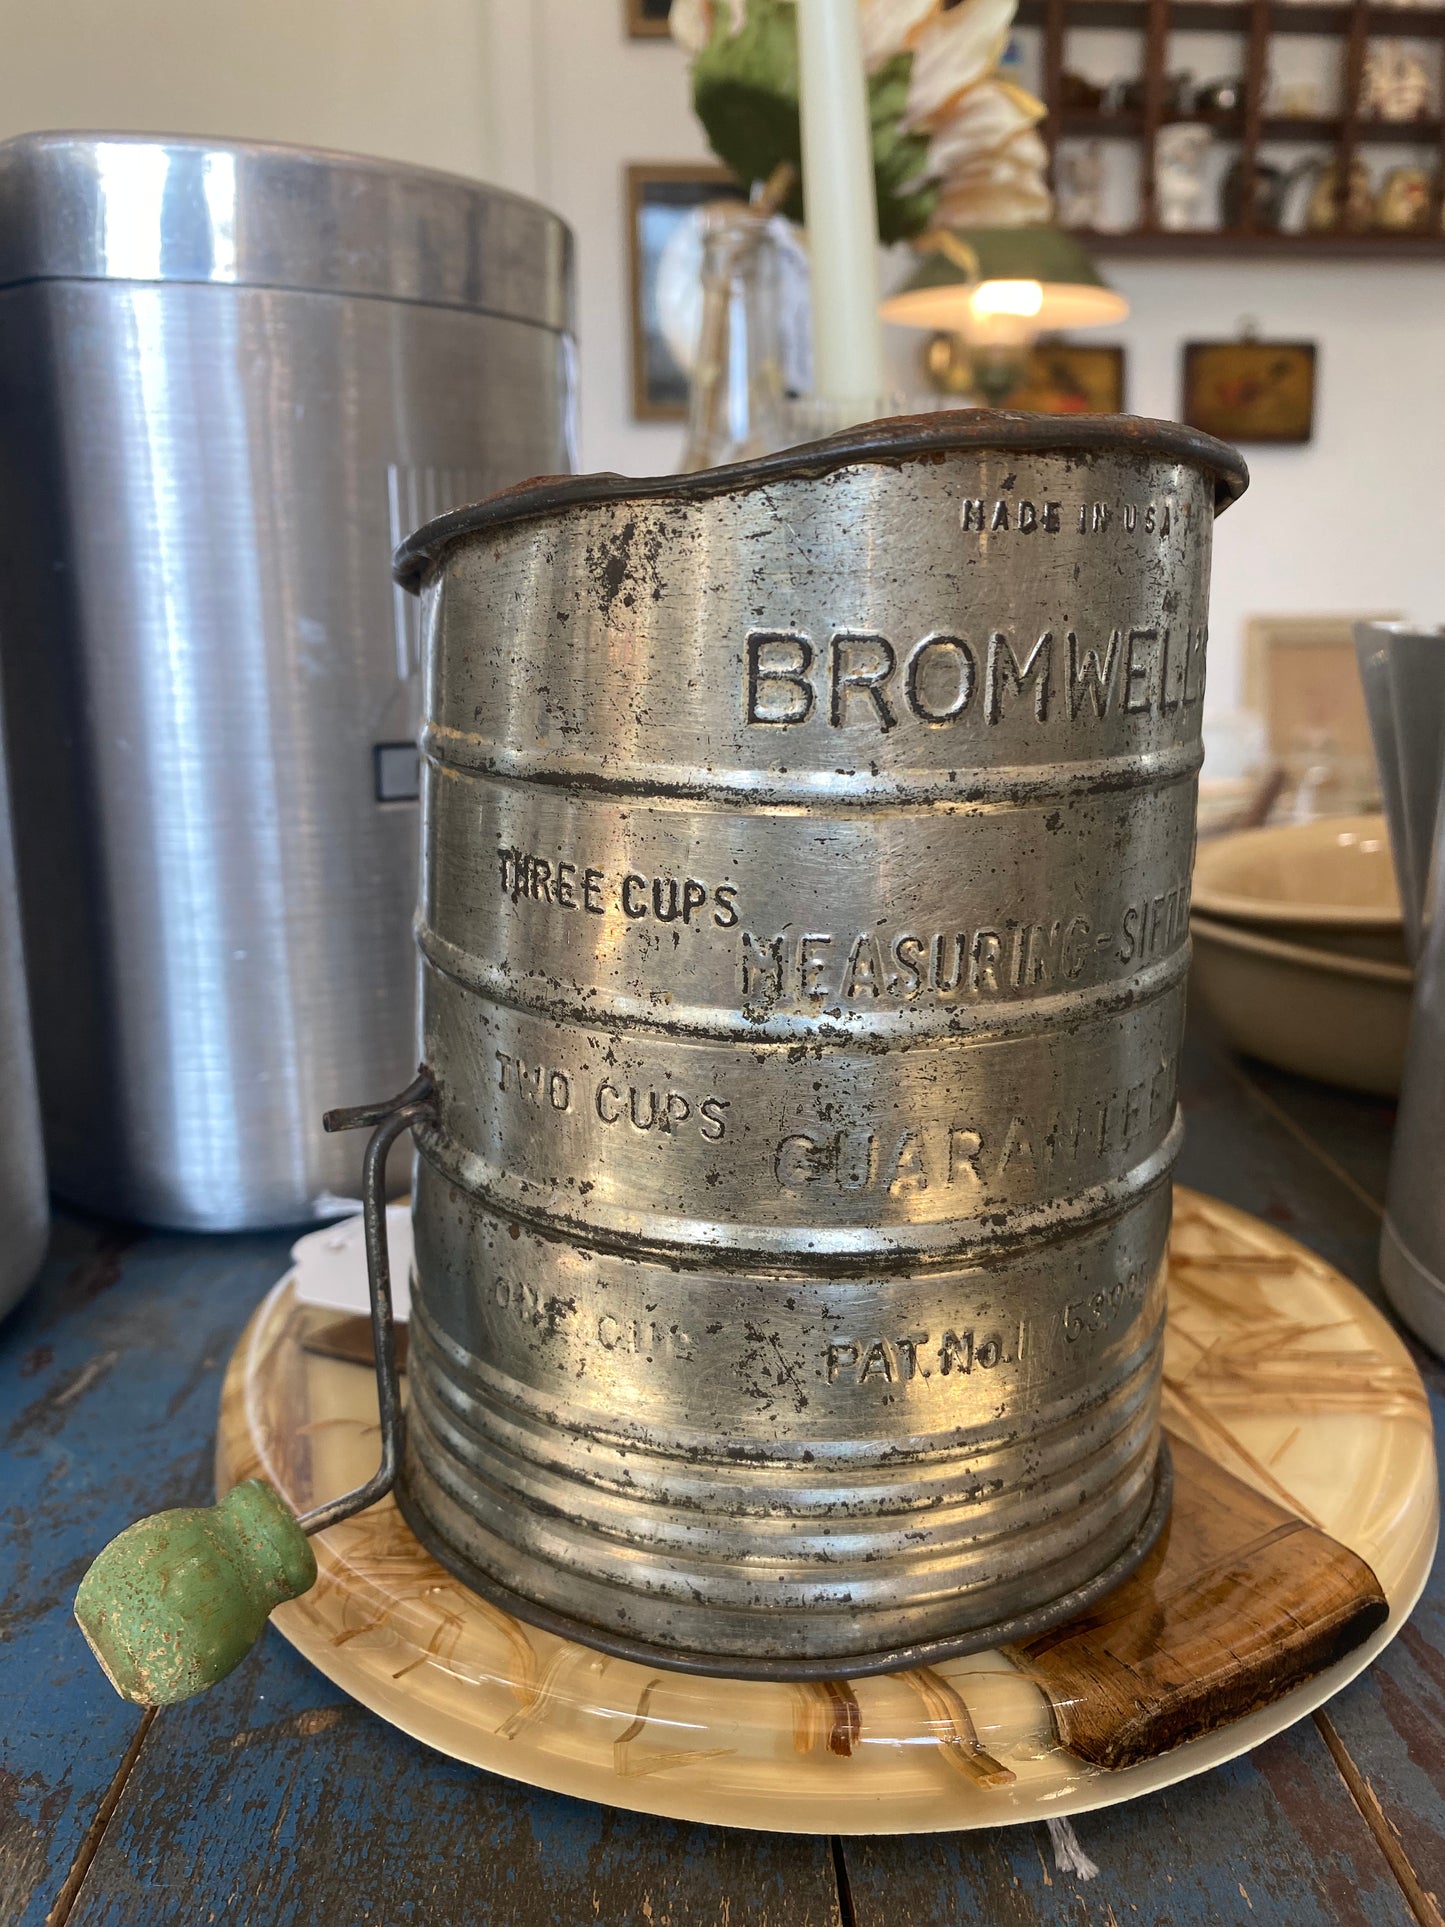 Bromwell’s Flour Sifter